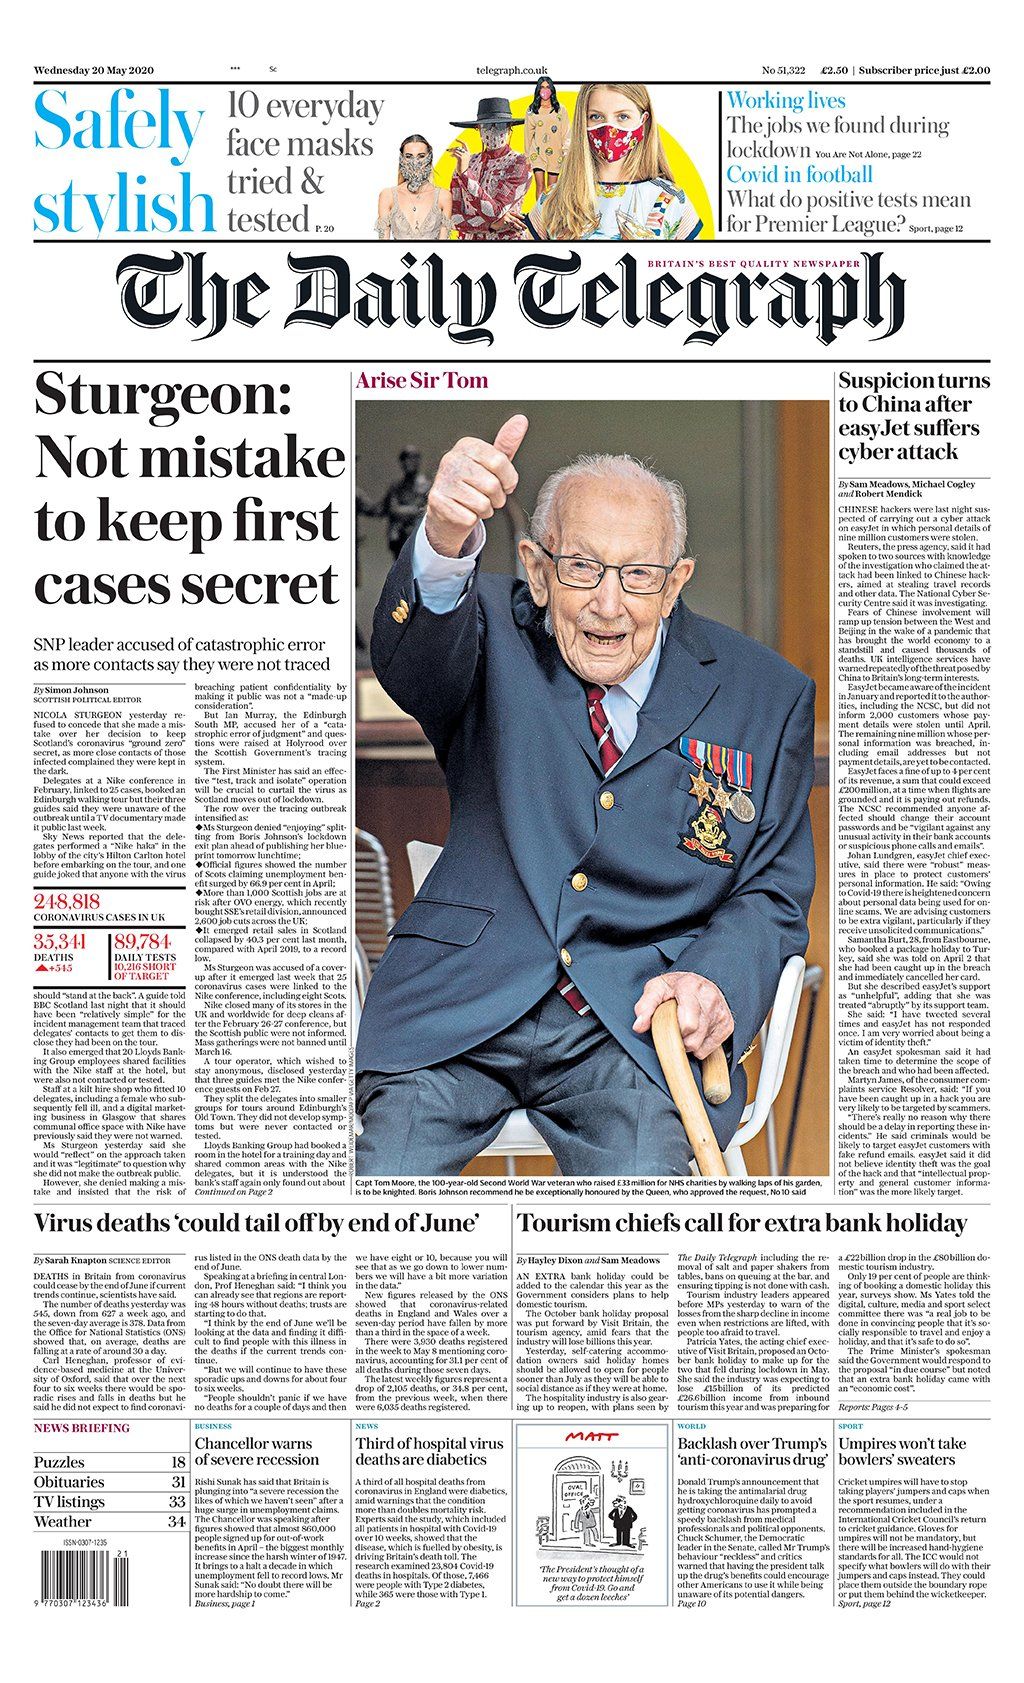 Scotland's papers: A nation on the brink and care home 'failure' - BBC News